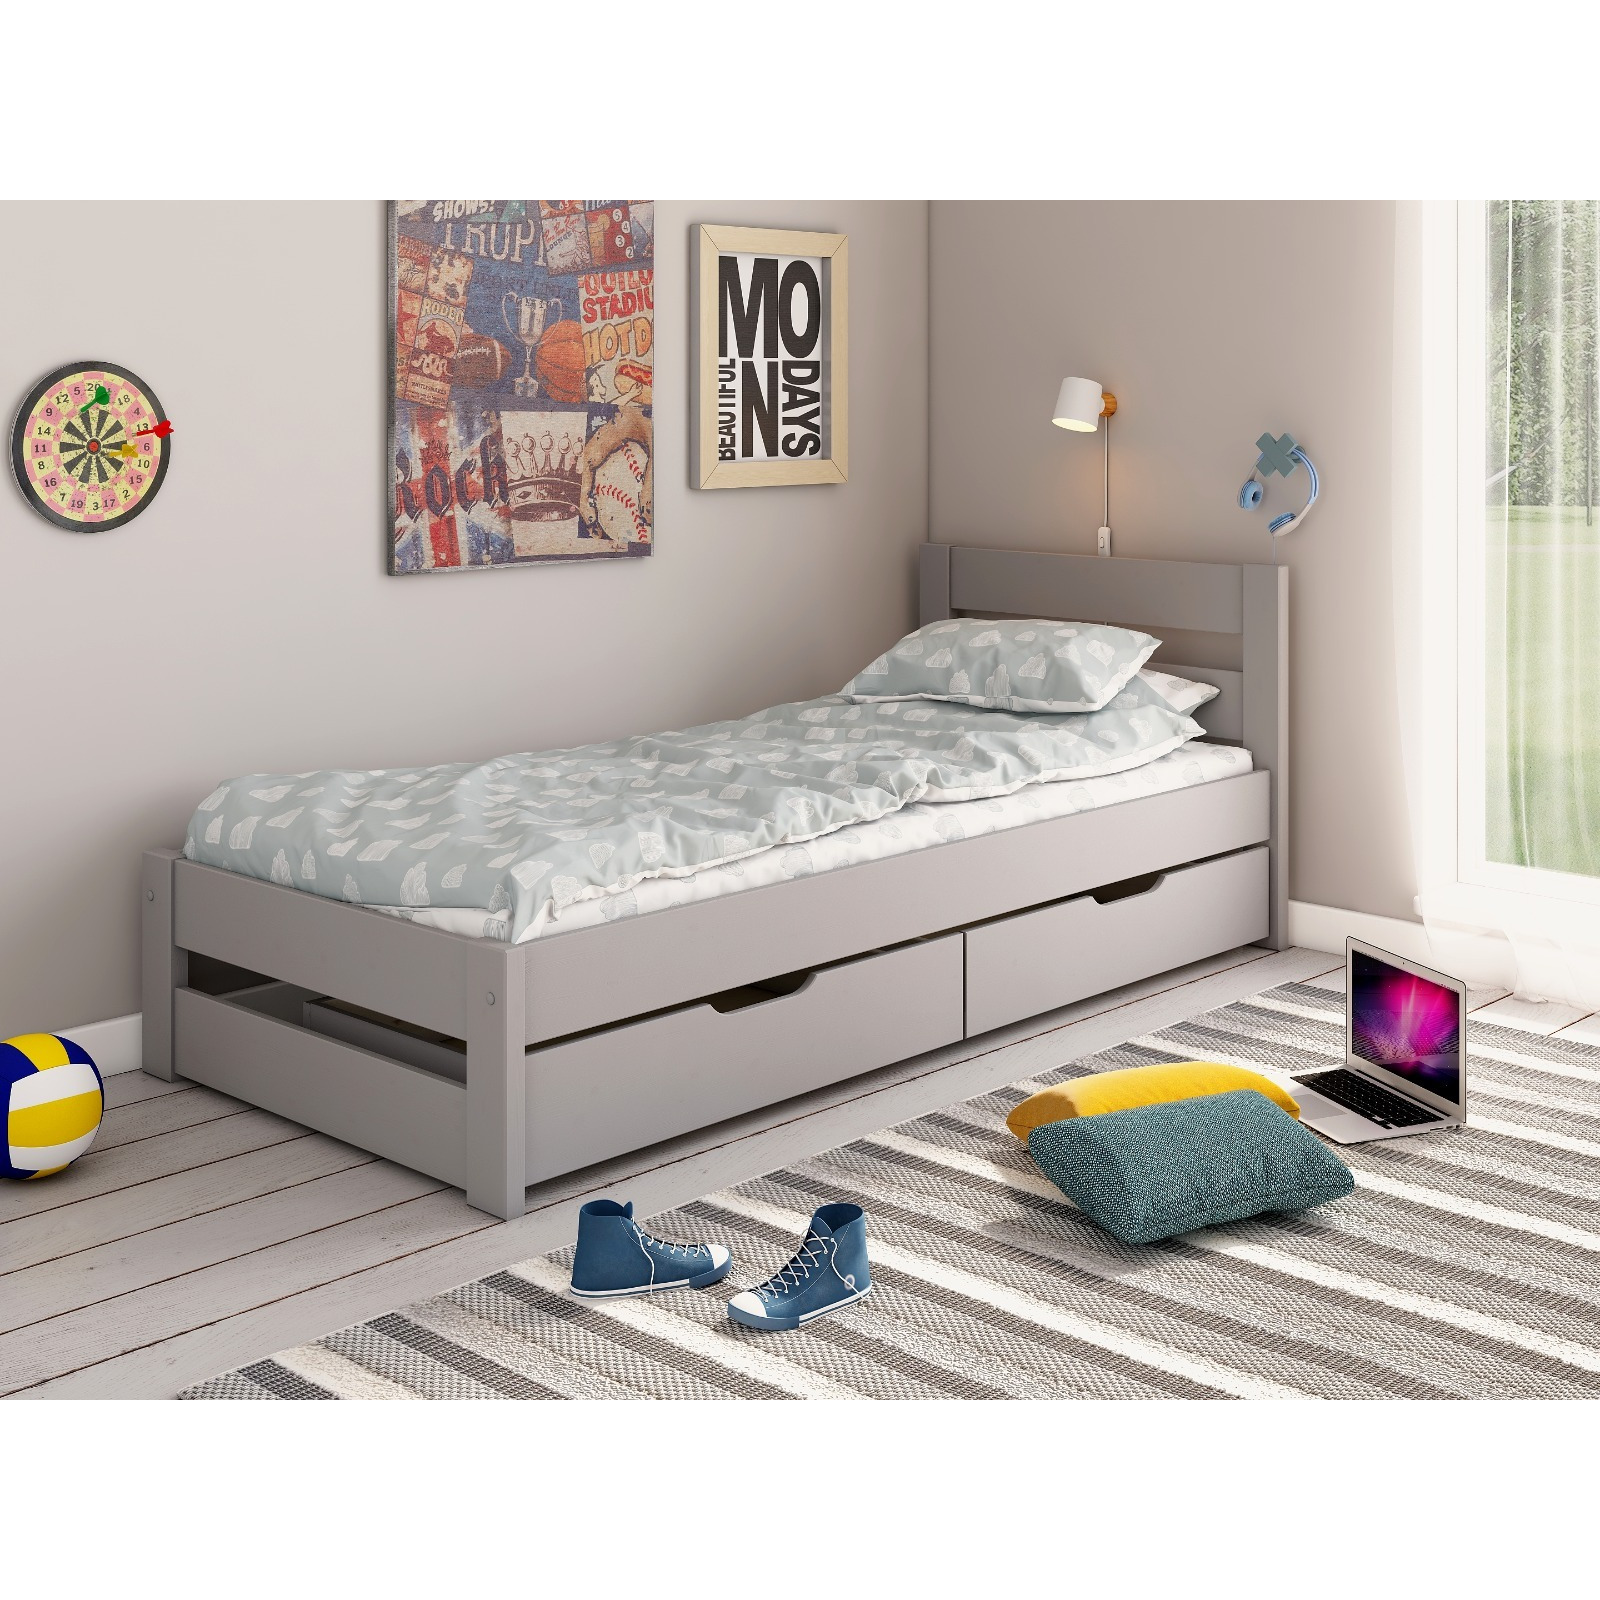 Noomi Tera Solid Wood Single Bed (FSC-Certified) Grey - image 1